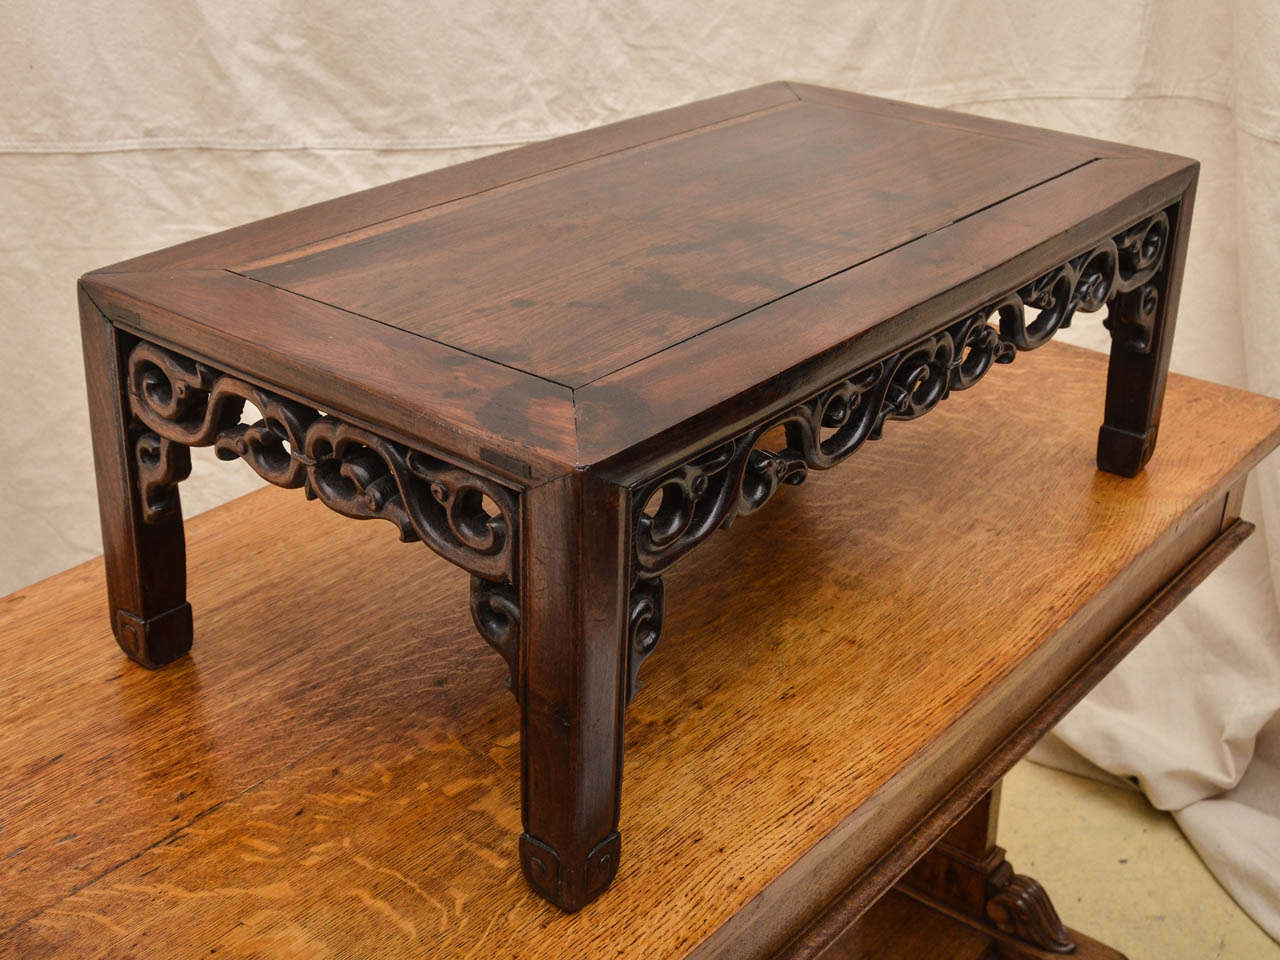 19th Cent. Chinese Low Opium Table With Scrolling Cut Out Apron. The Top Formed With A Mitered Joint -- Legs Terminating With A Carved Incised Greek Key Motif. The Table Has Beautiful Aged Patina. The Wood Is A Asian Hardwood  Similar To Rosewood.